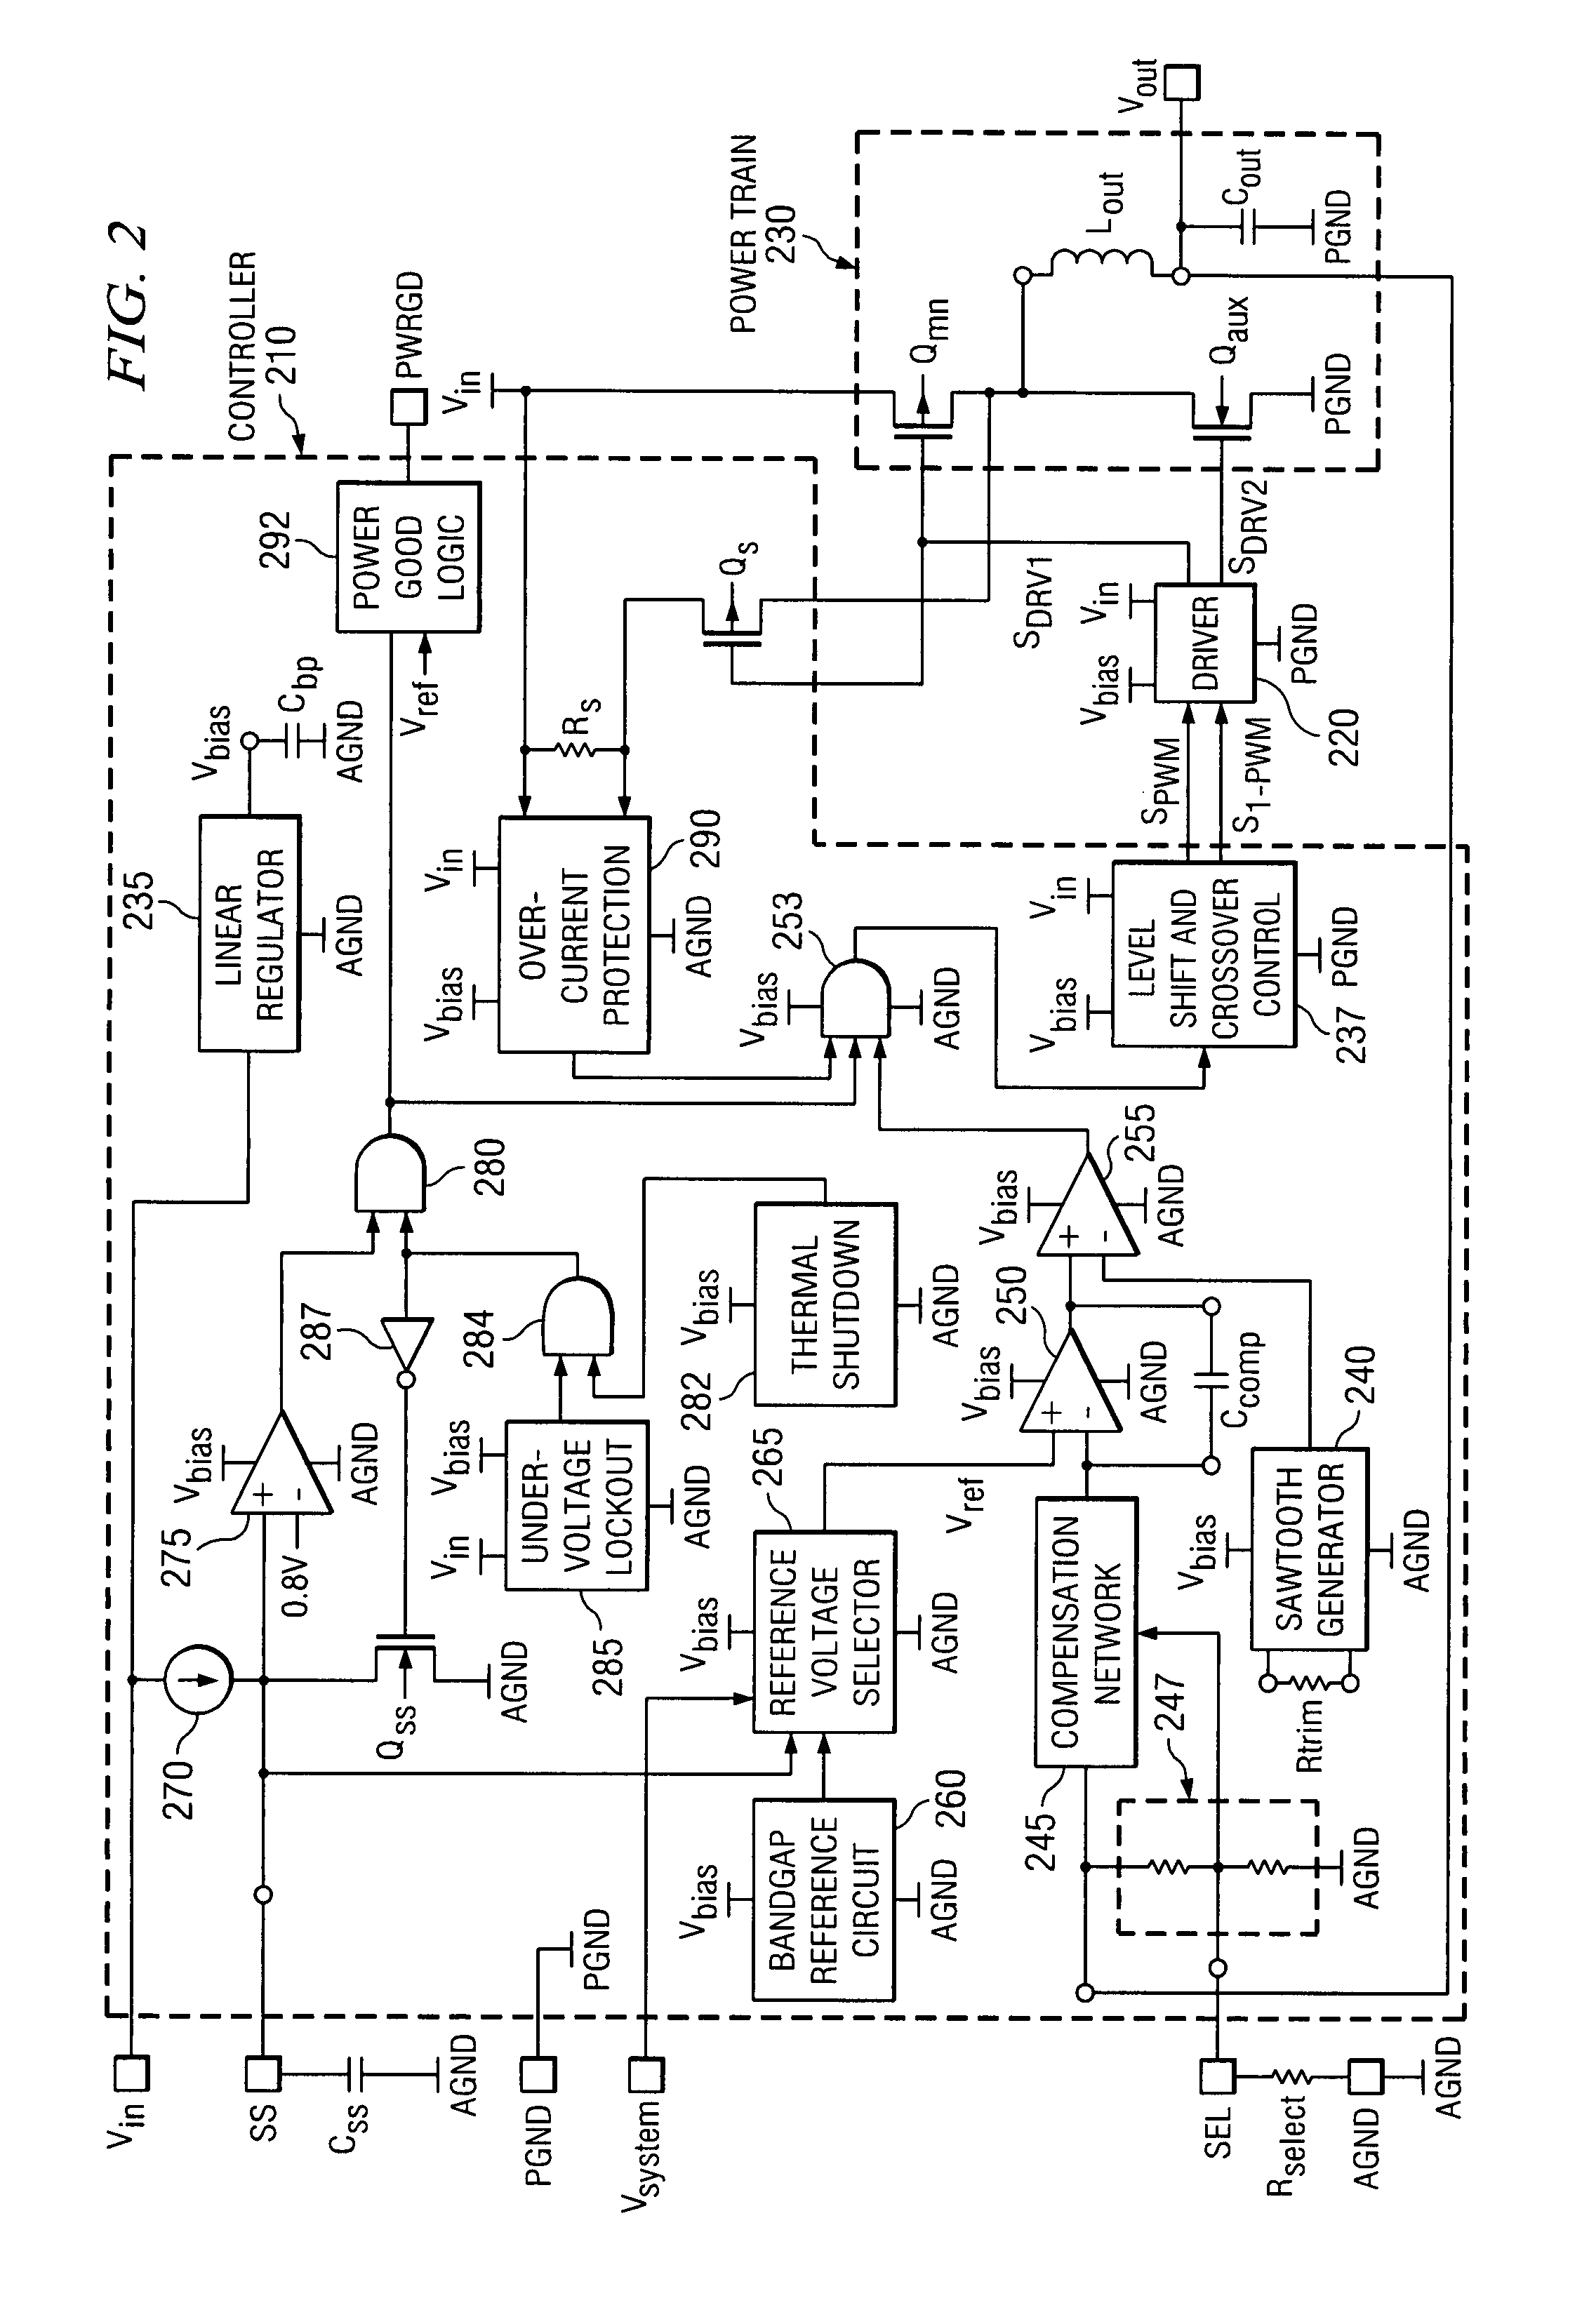 Method of forming an integrated circuit incorporating higher voltage devices and low voltage devices therein